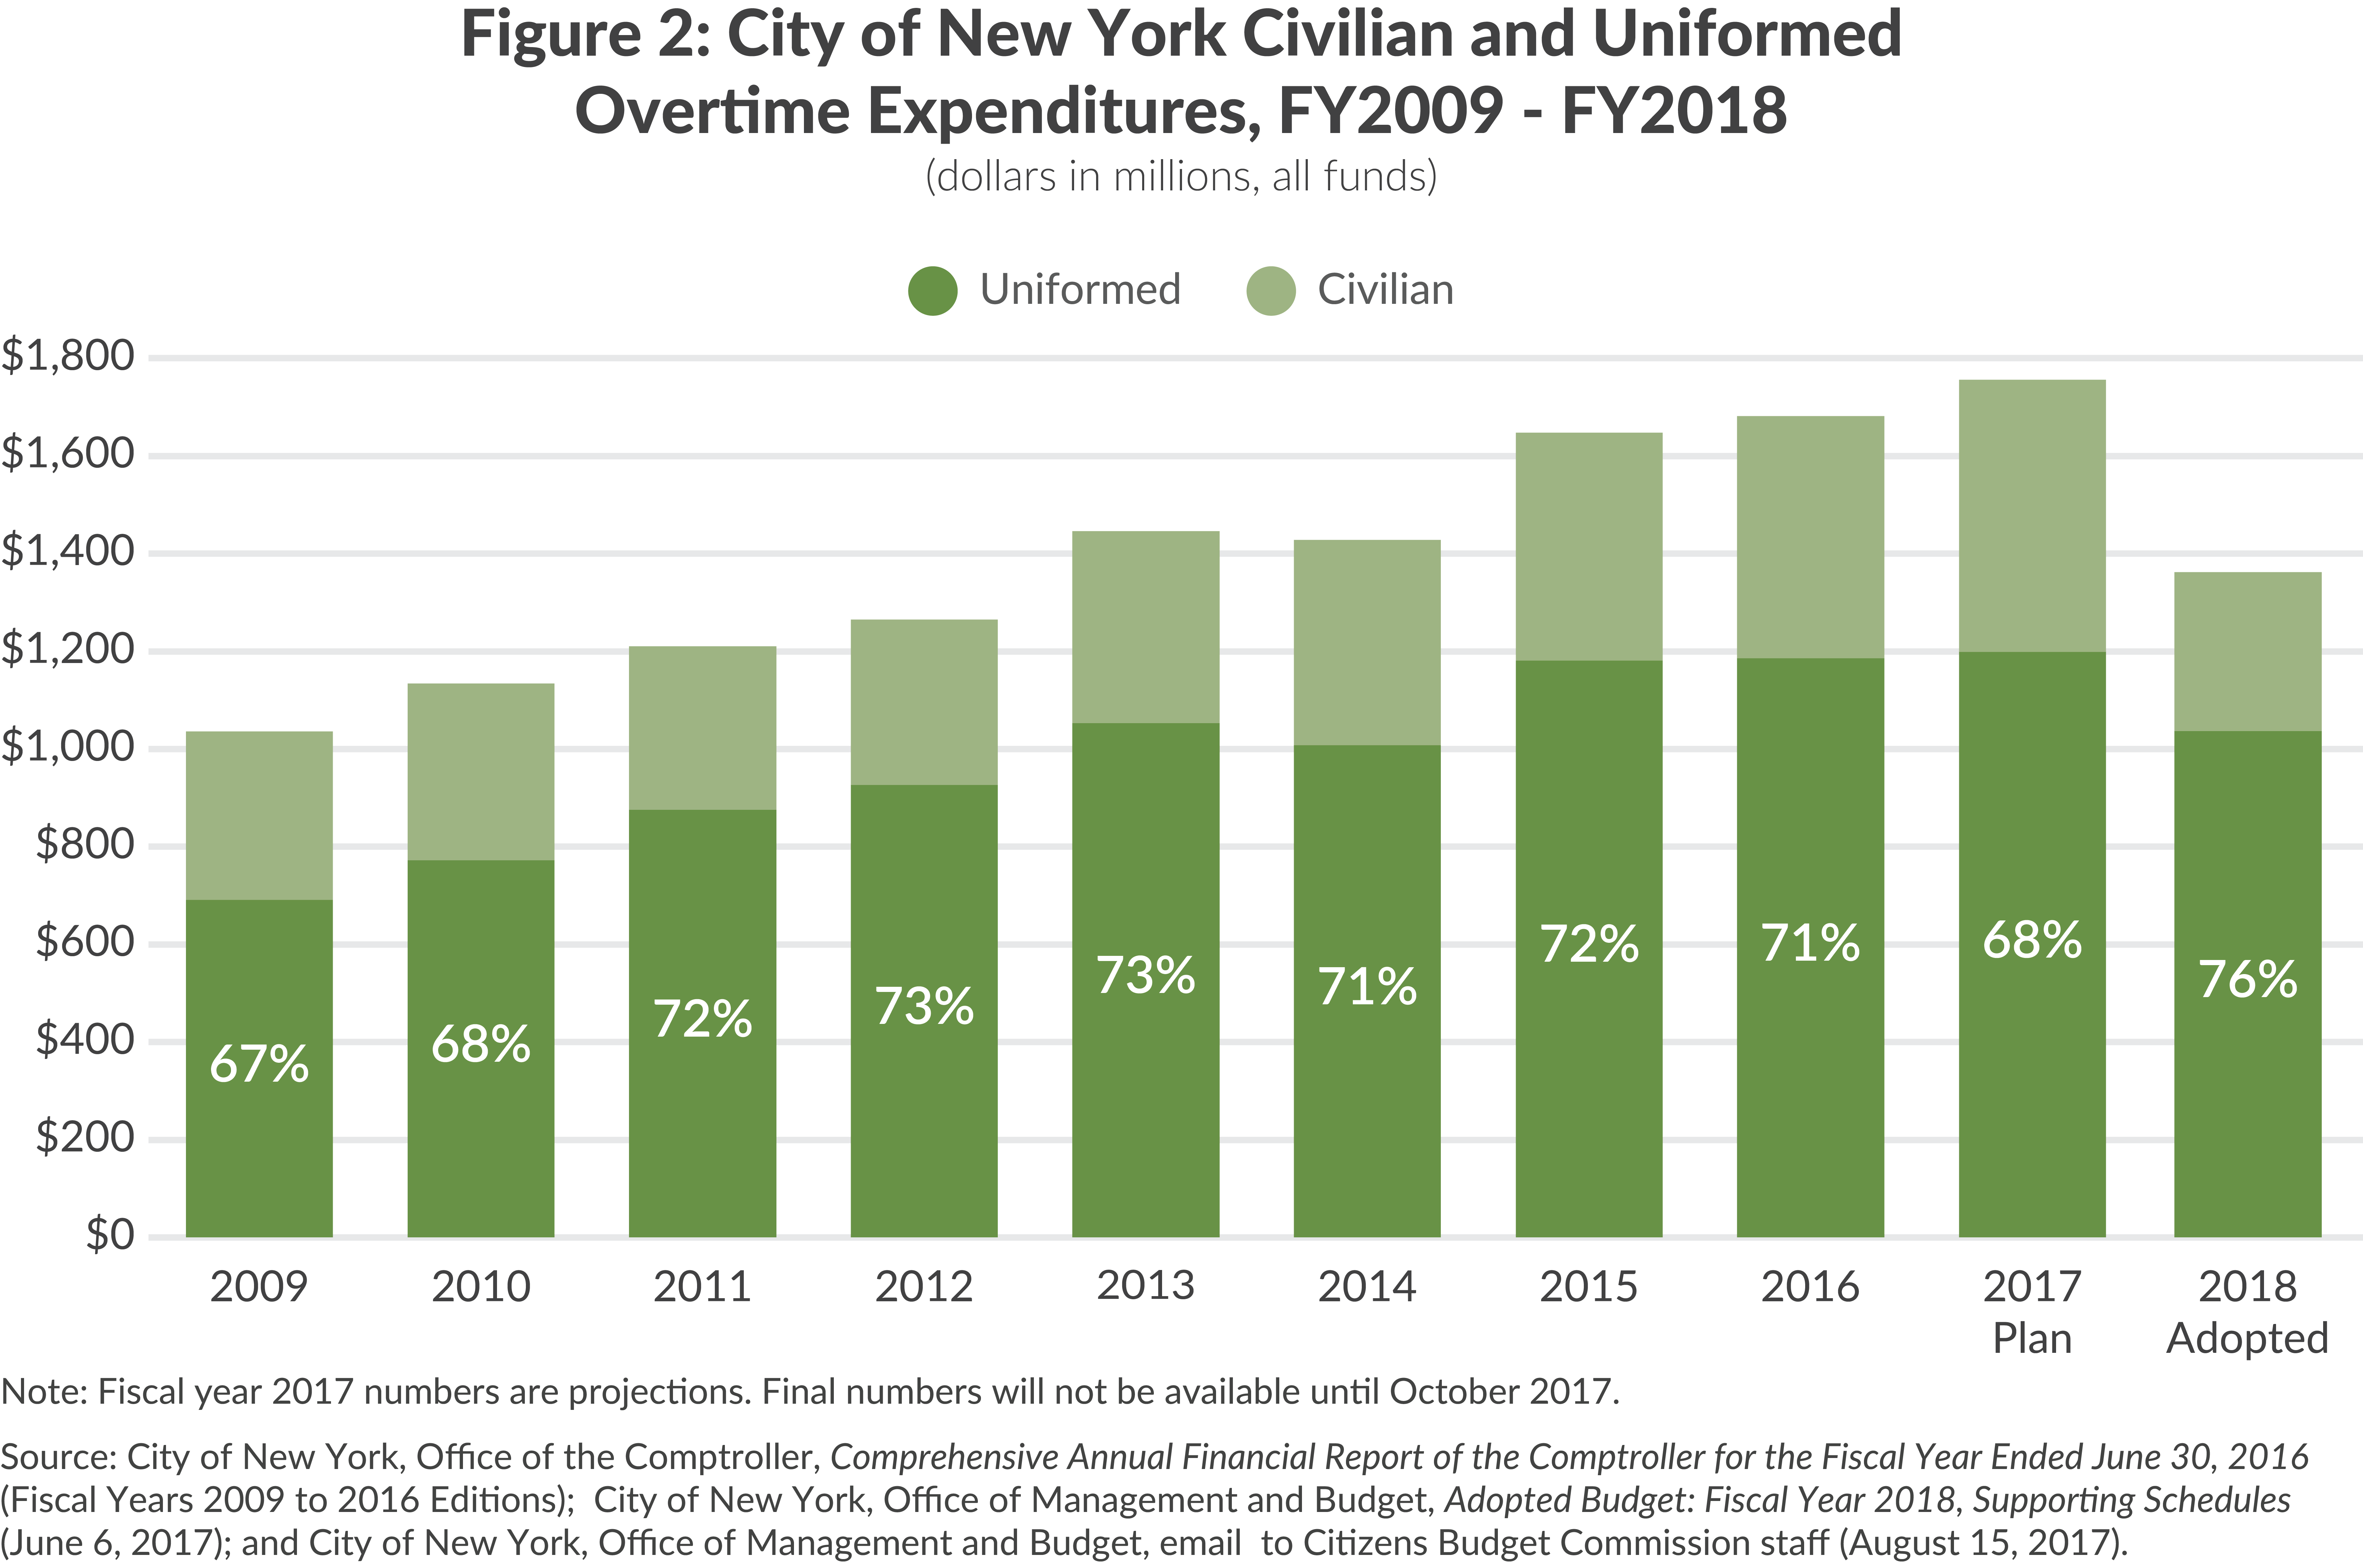 NYC Civilian and Uniformed Overtime Expenditures, FY2009-FY2018